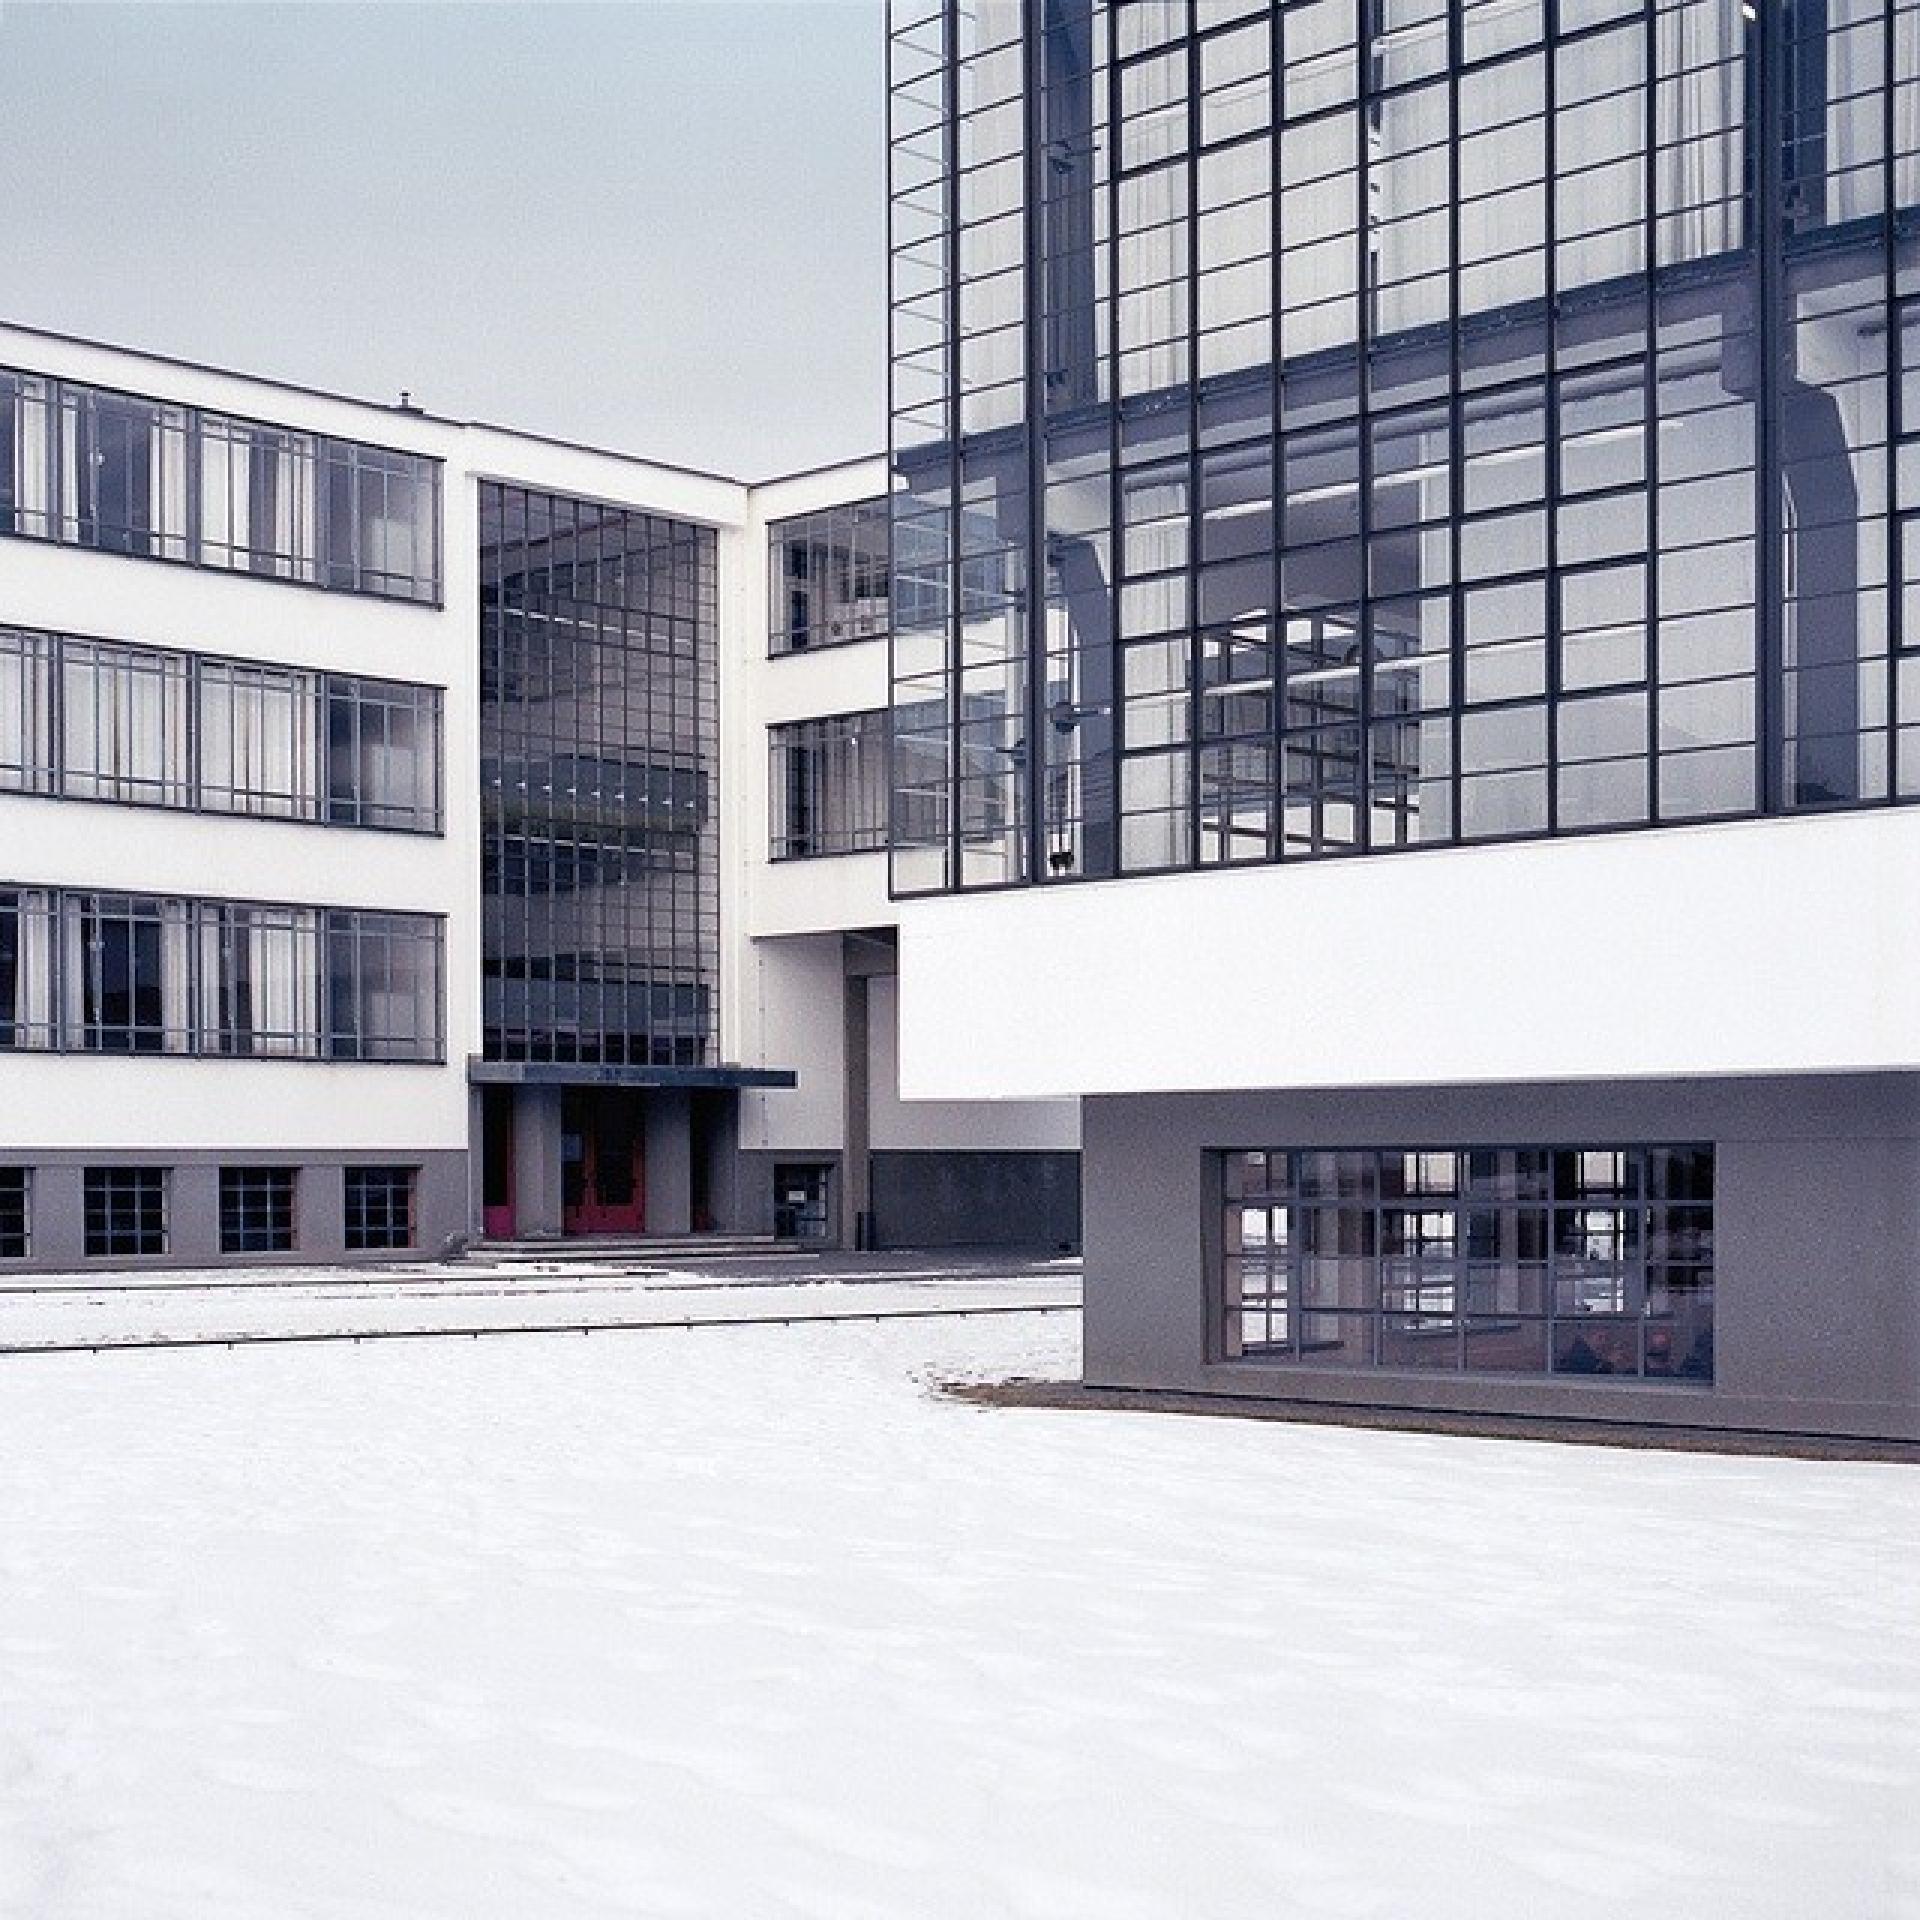 The Bauhaus school building was built in Dessau between the years 1925 and 1926. | Photo via Tumblr Isbjorn collective